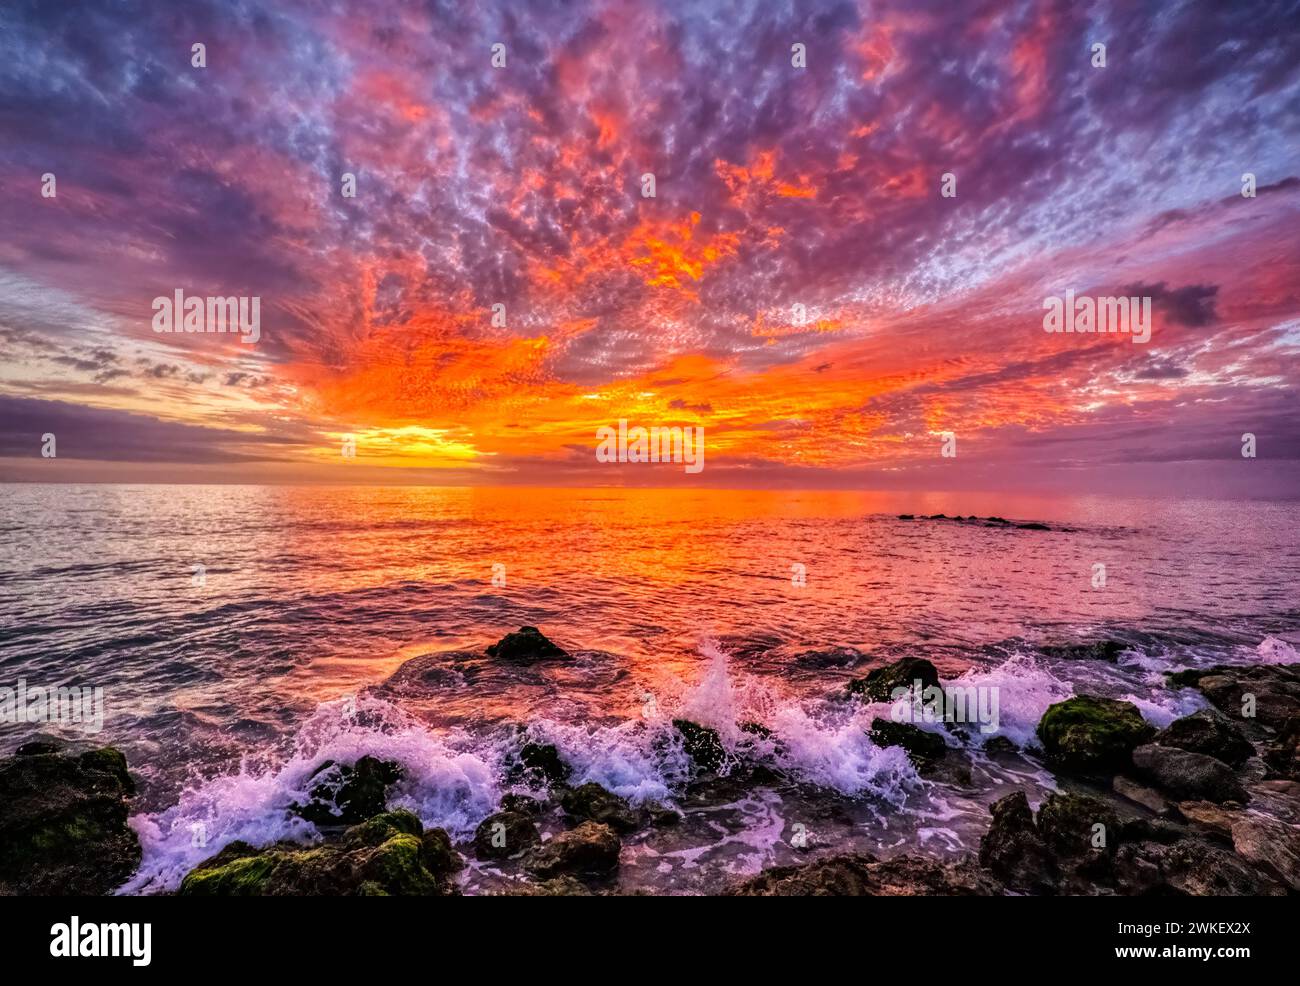 Brilliant red clouds in the sky at sunset over the Gulf of Mexico at Caspersen Baech in Venice Florida USA Stock Photo